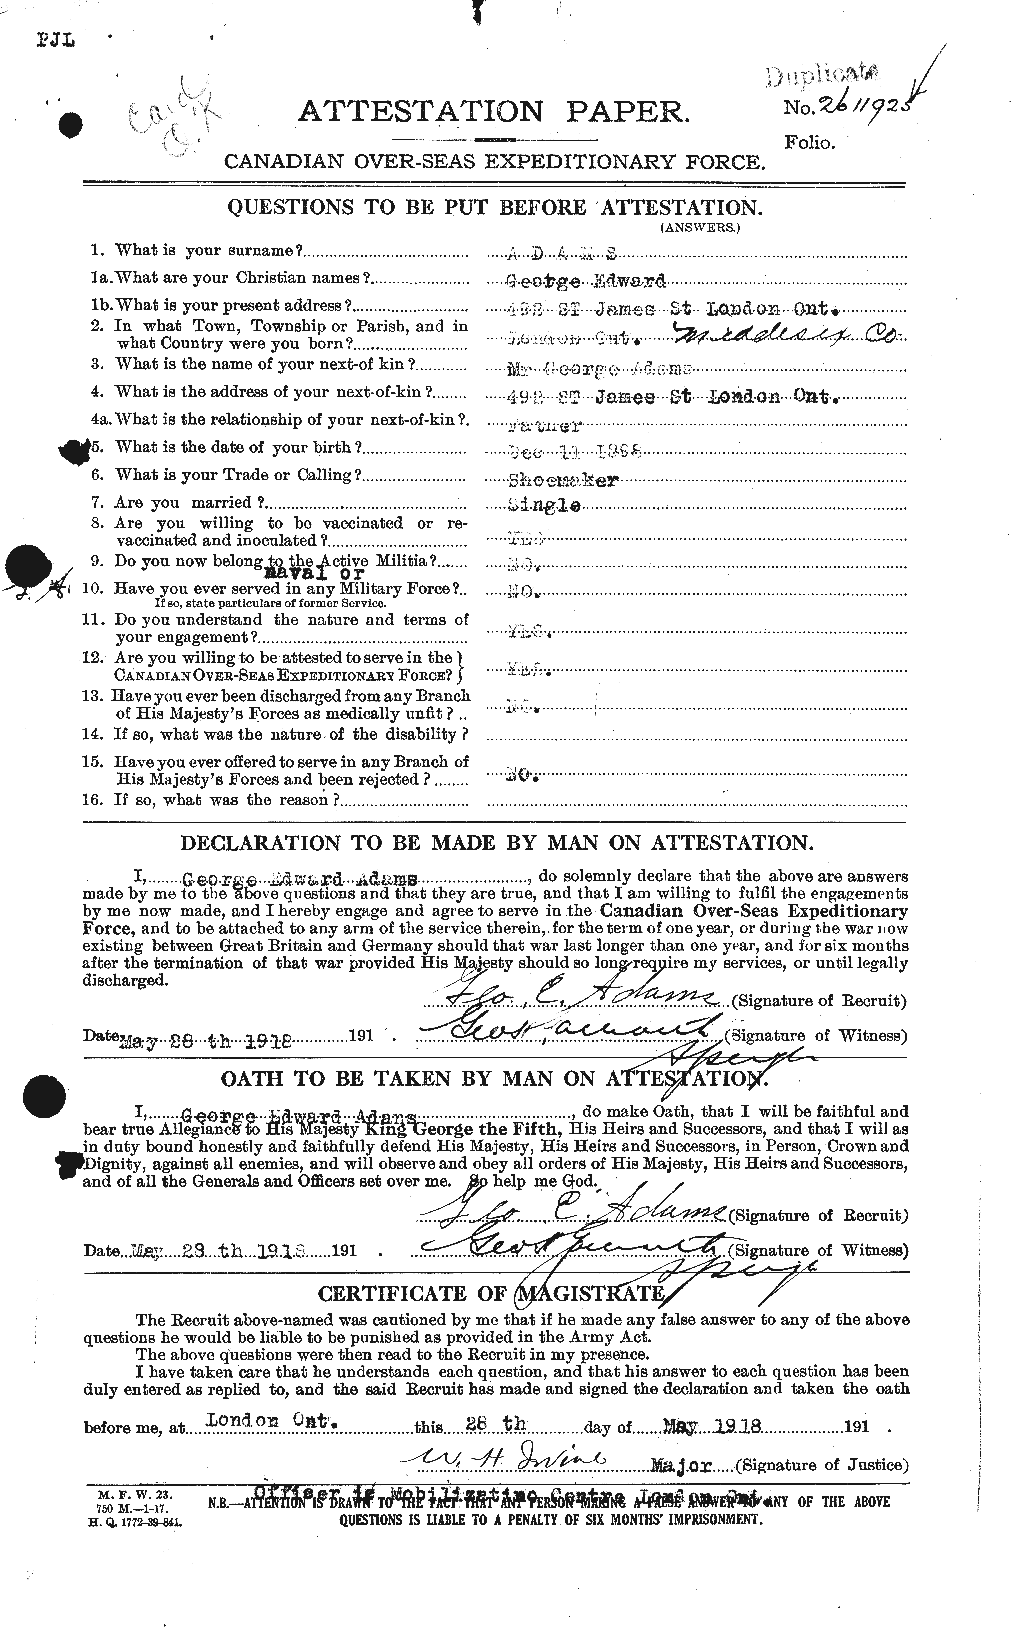 Personnel Records of the First World War - CEF 202555a